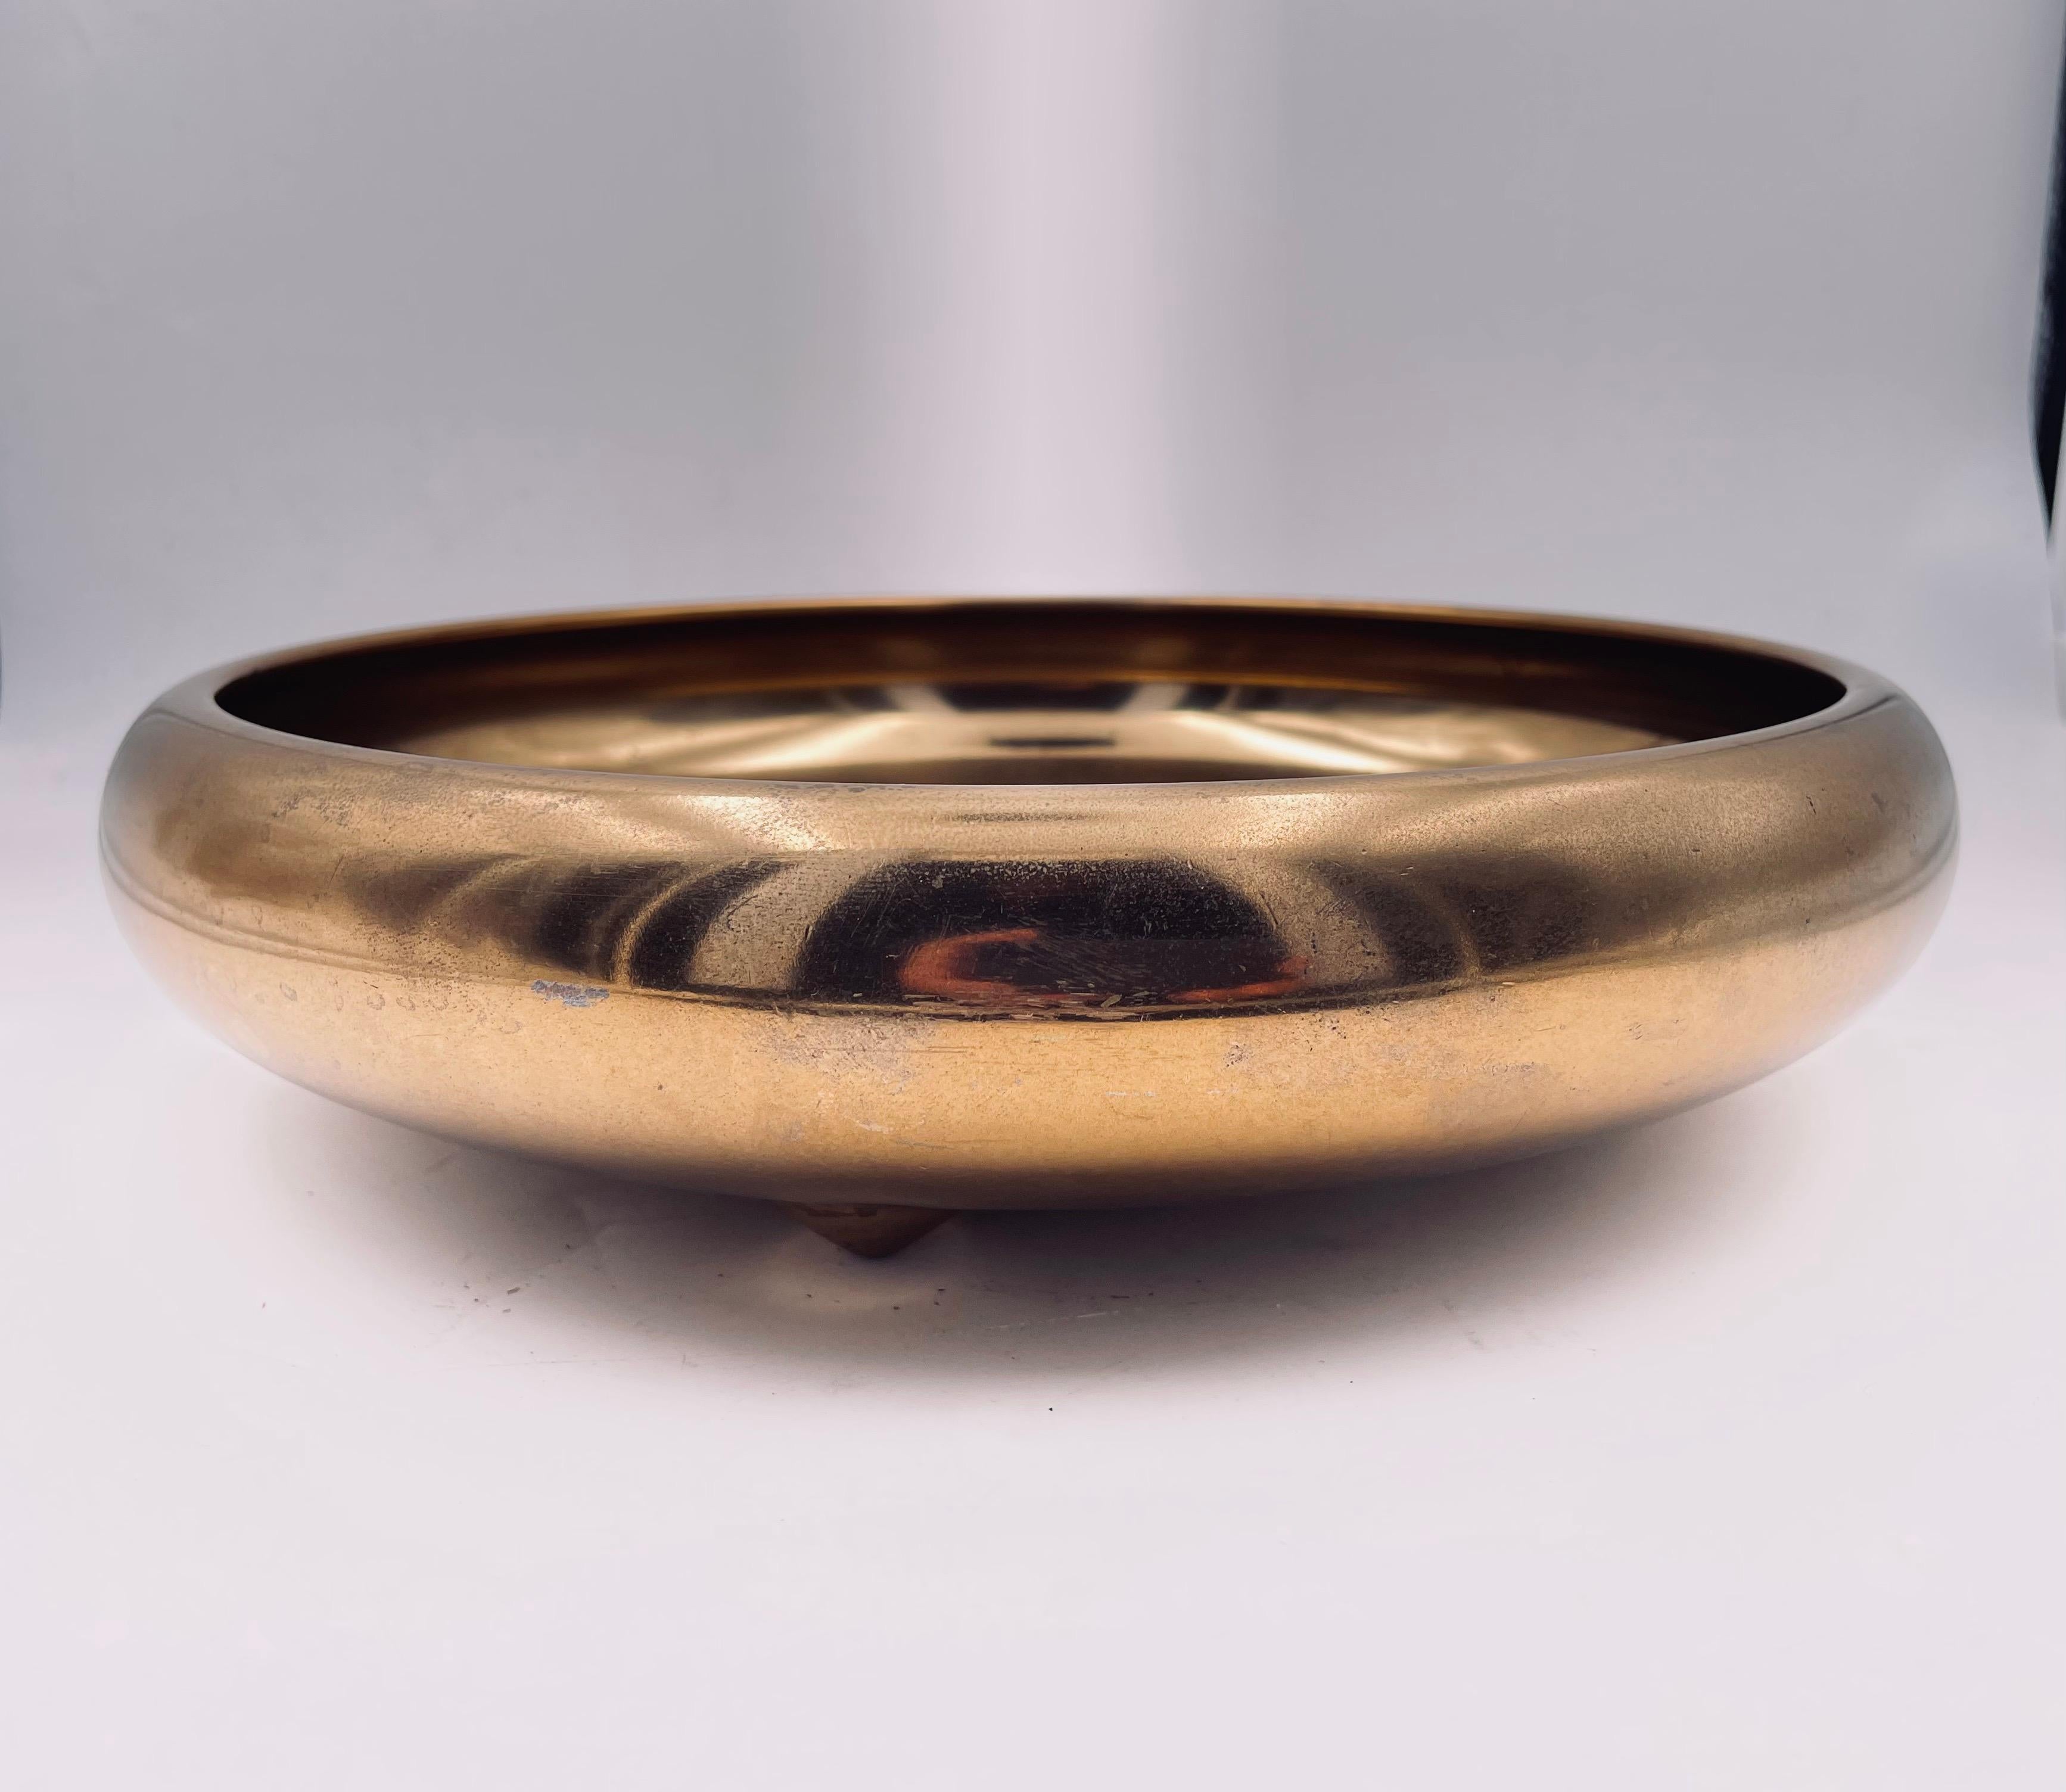 Beautiful solid polished brass catch it all bowl, by Zeiglier nice niple feet well done heavy signed at the bottom some tarnish due to normal wear but can be polished.